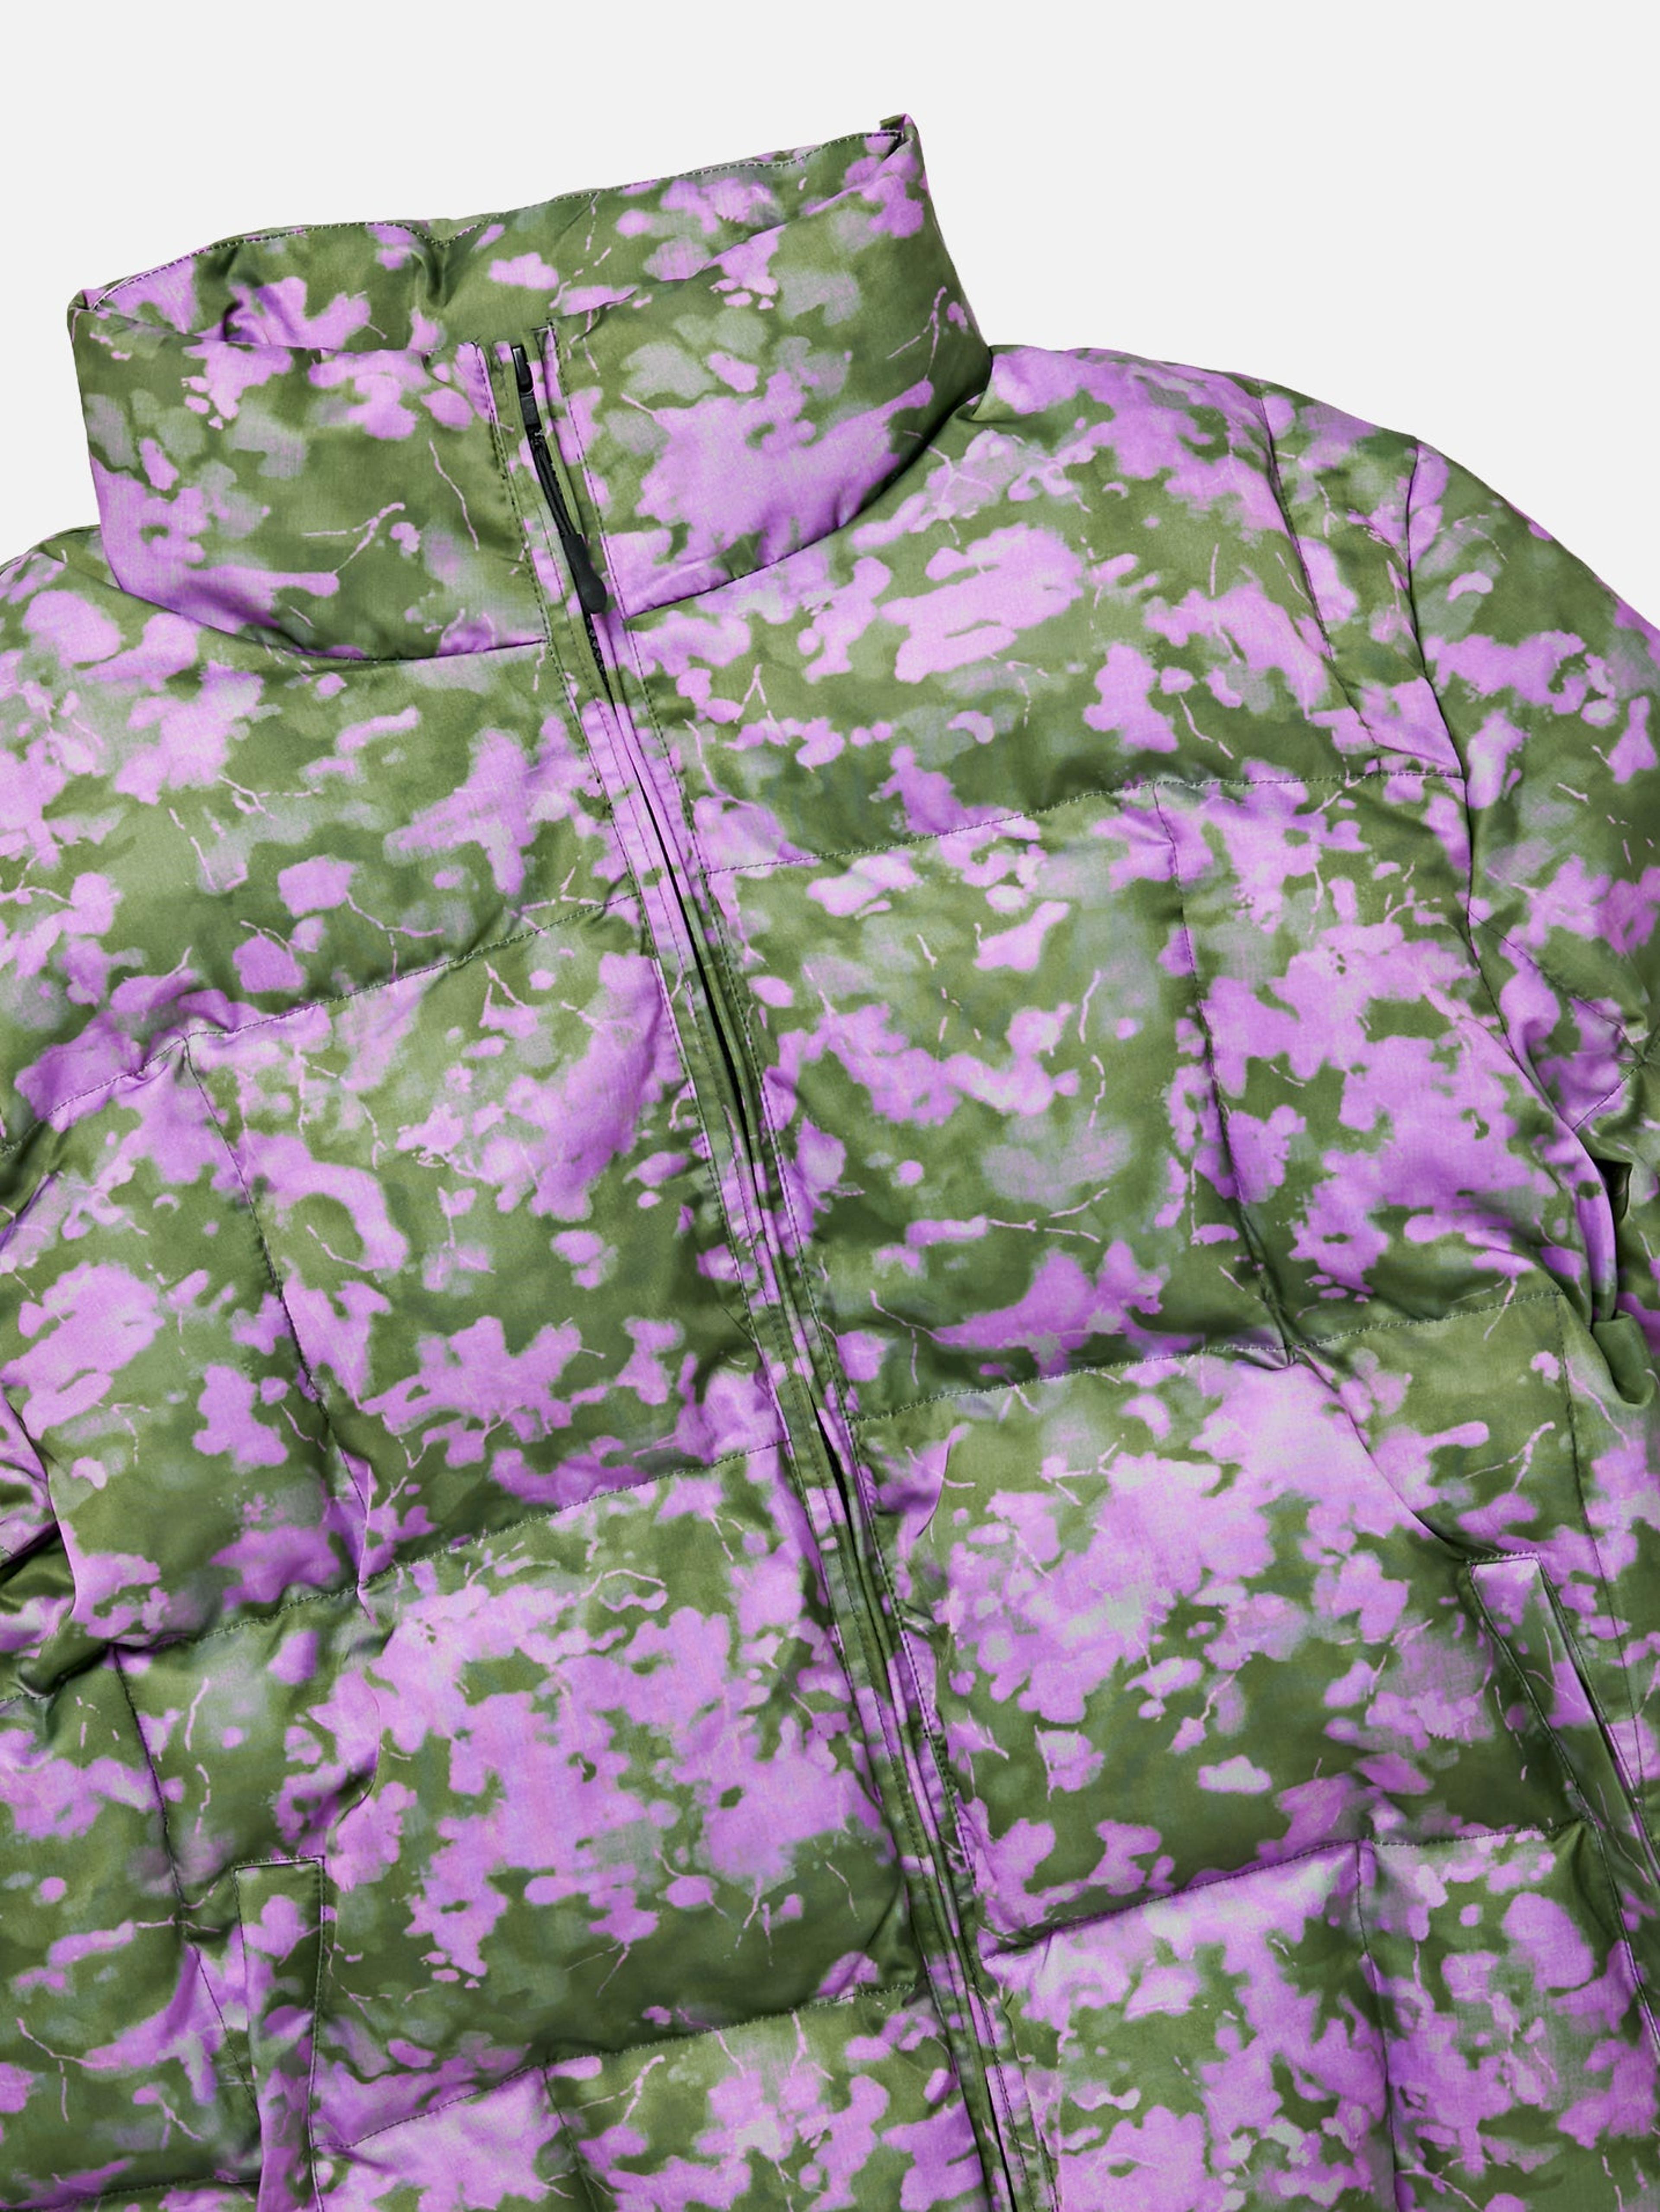 Alternate View 2 of Thermal Camo Puffer - Purple